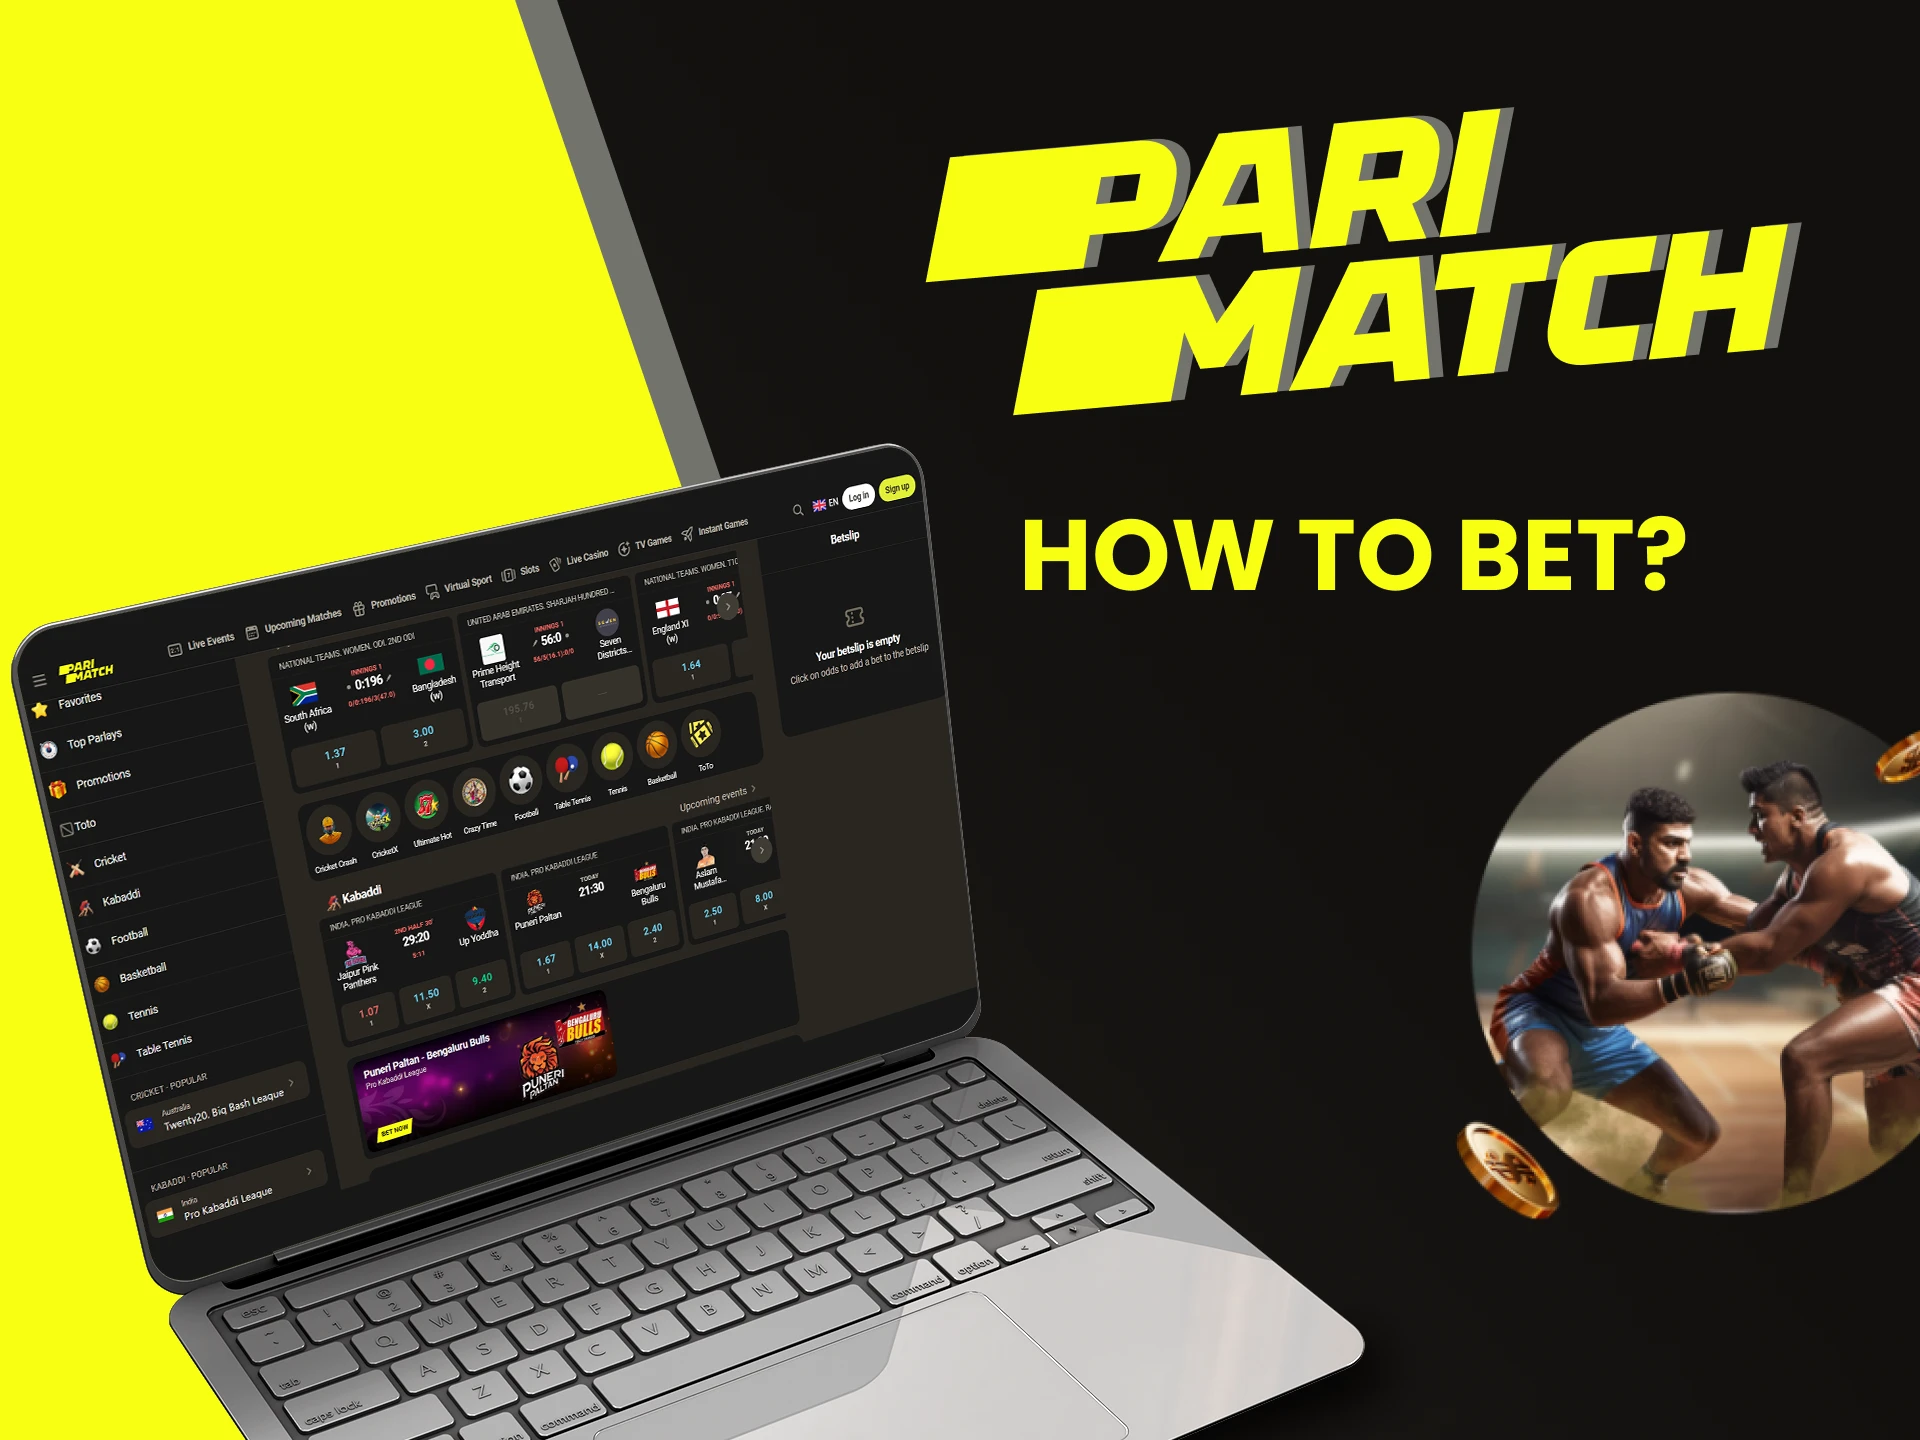 Go to the sports section for betting on Parimatch.